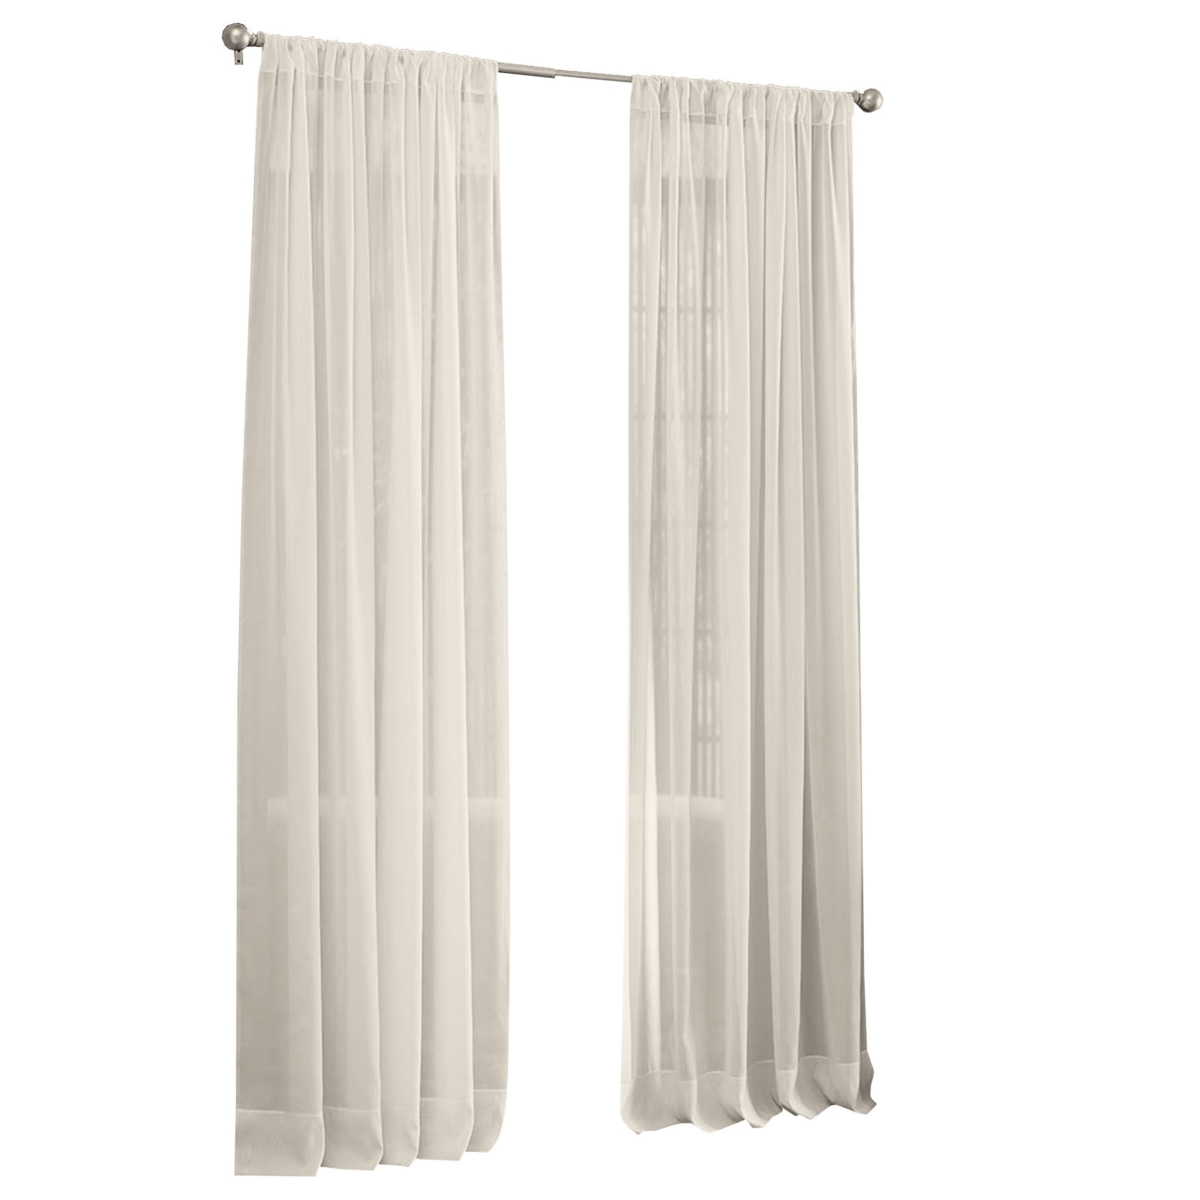 Voiledrap-118x48-ivory Sheer Voile Drape Panel, Ivory - 118 X 48 In.